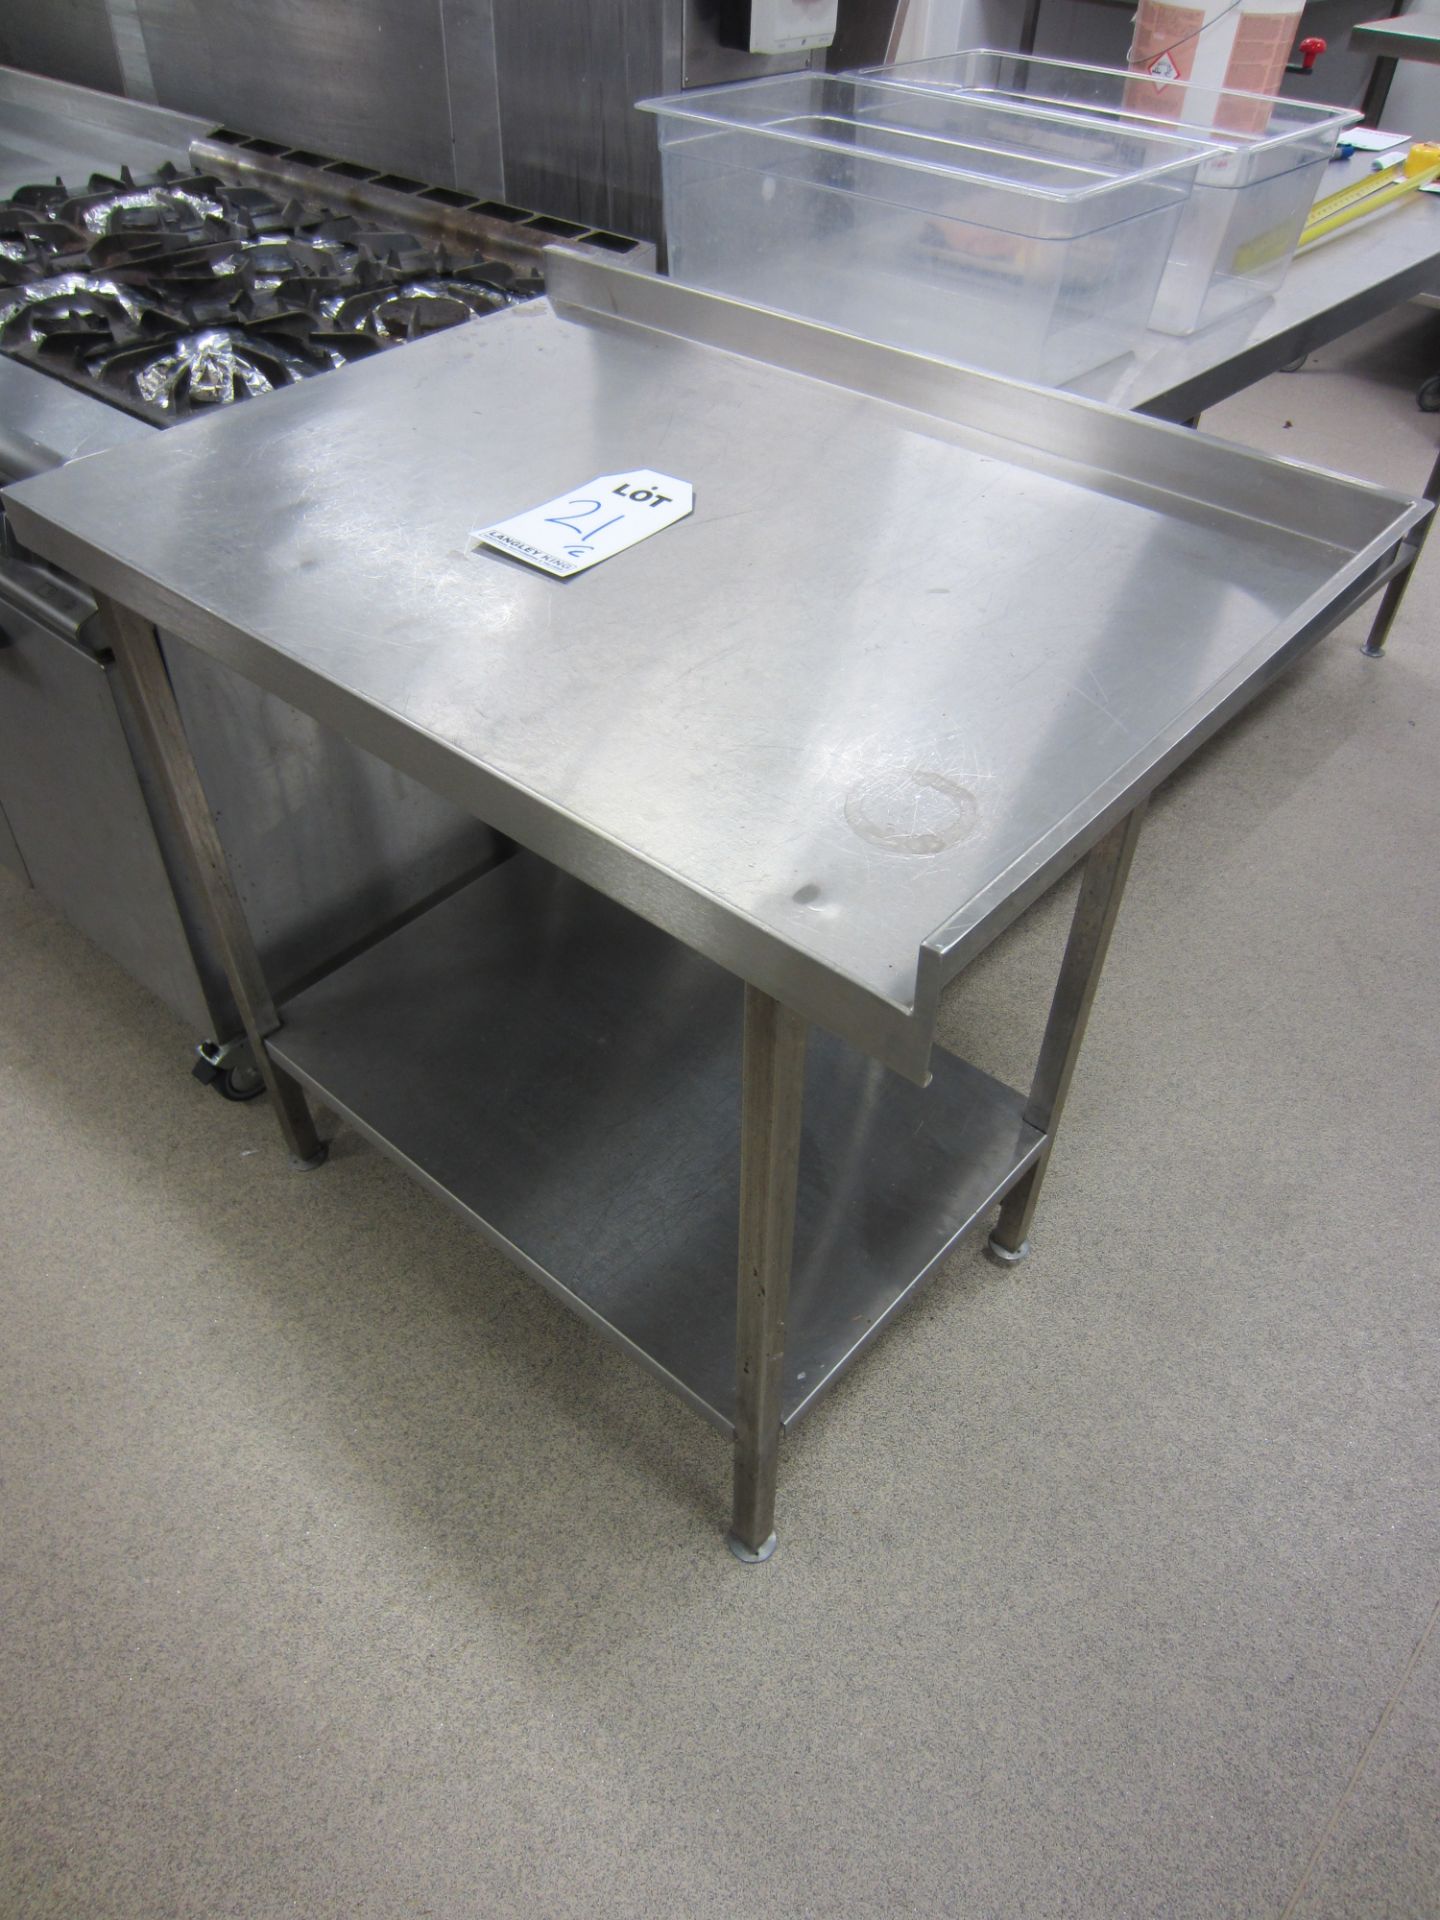 Two Stainless Steel Prep Tables With Upstand At Rear, One Left & Right As Pictured - Image 2 of 2